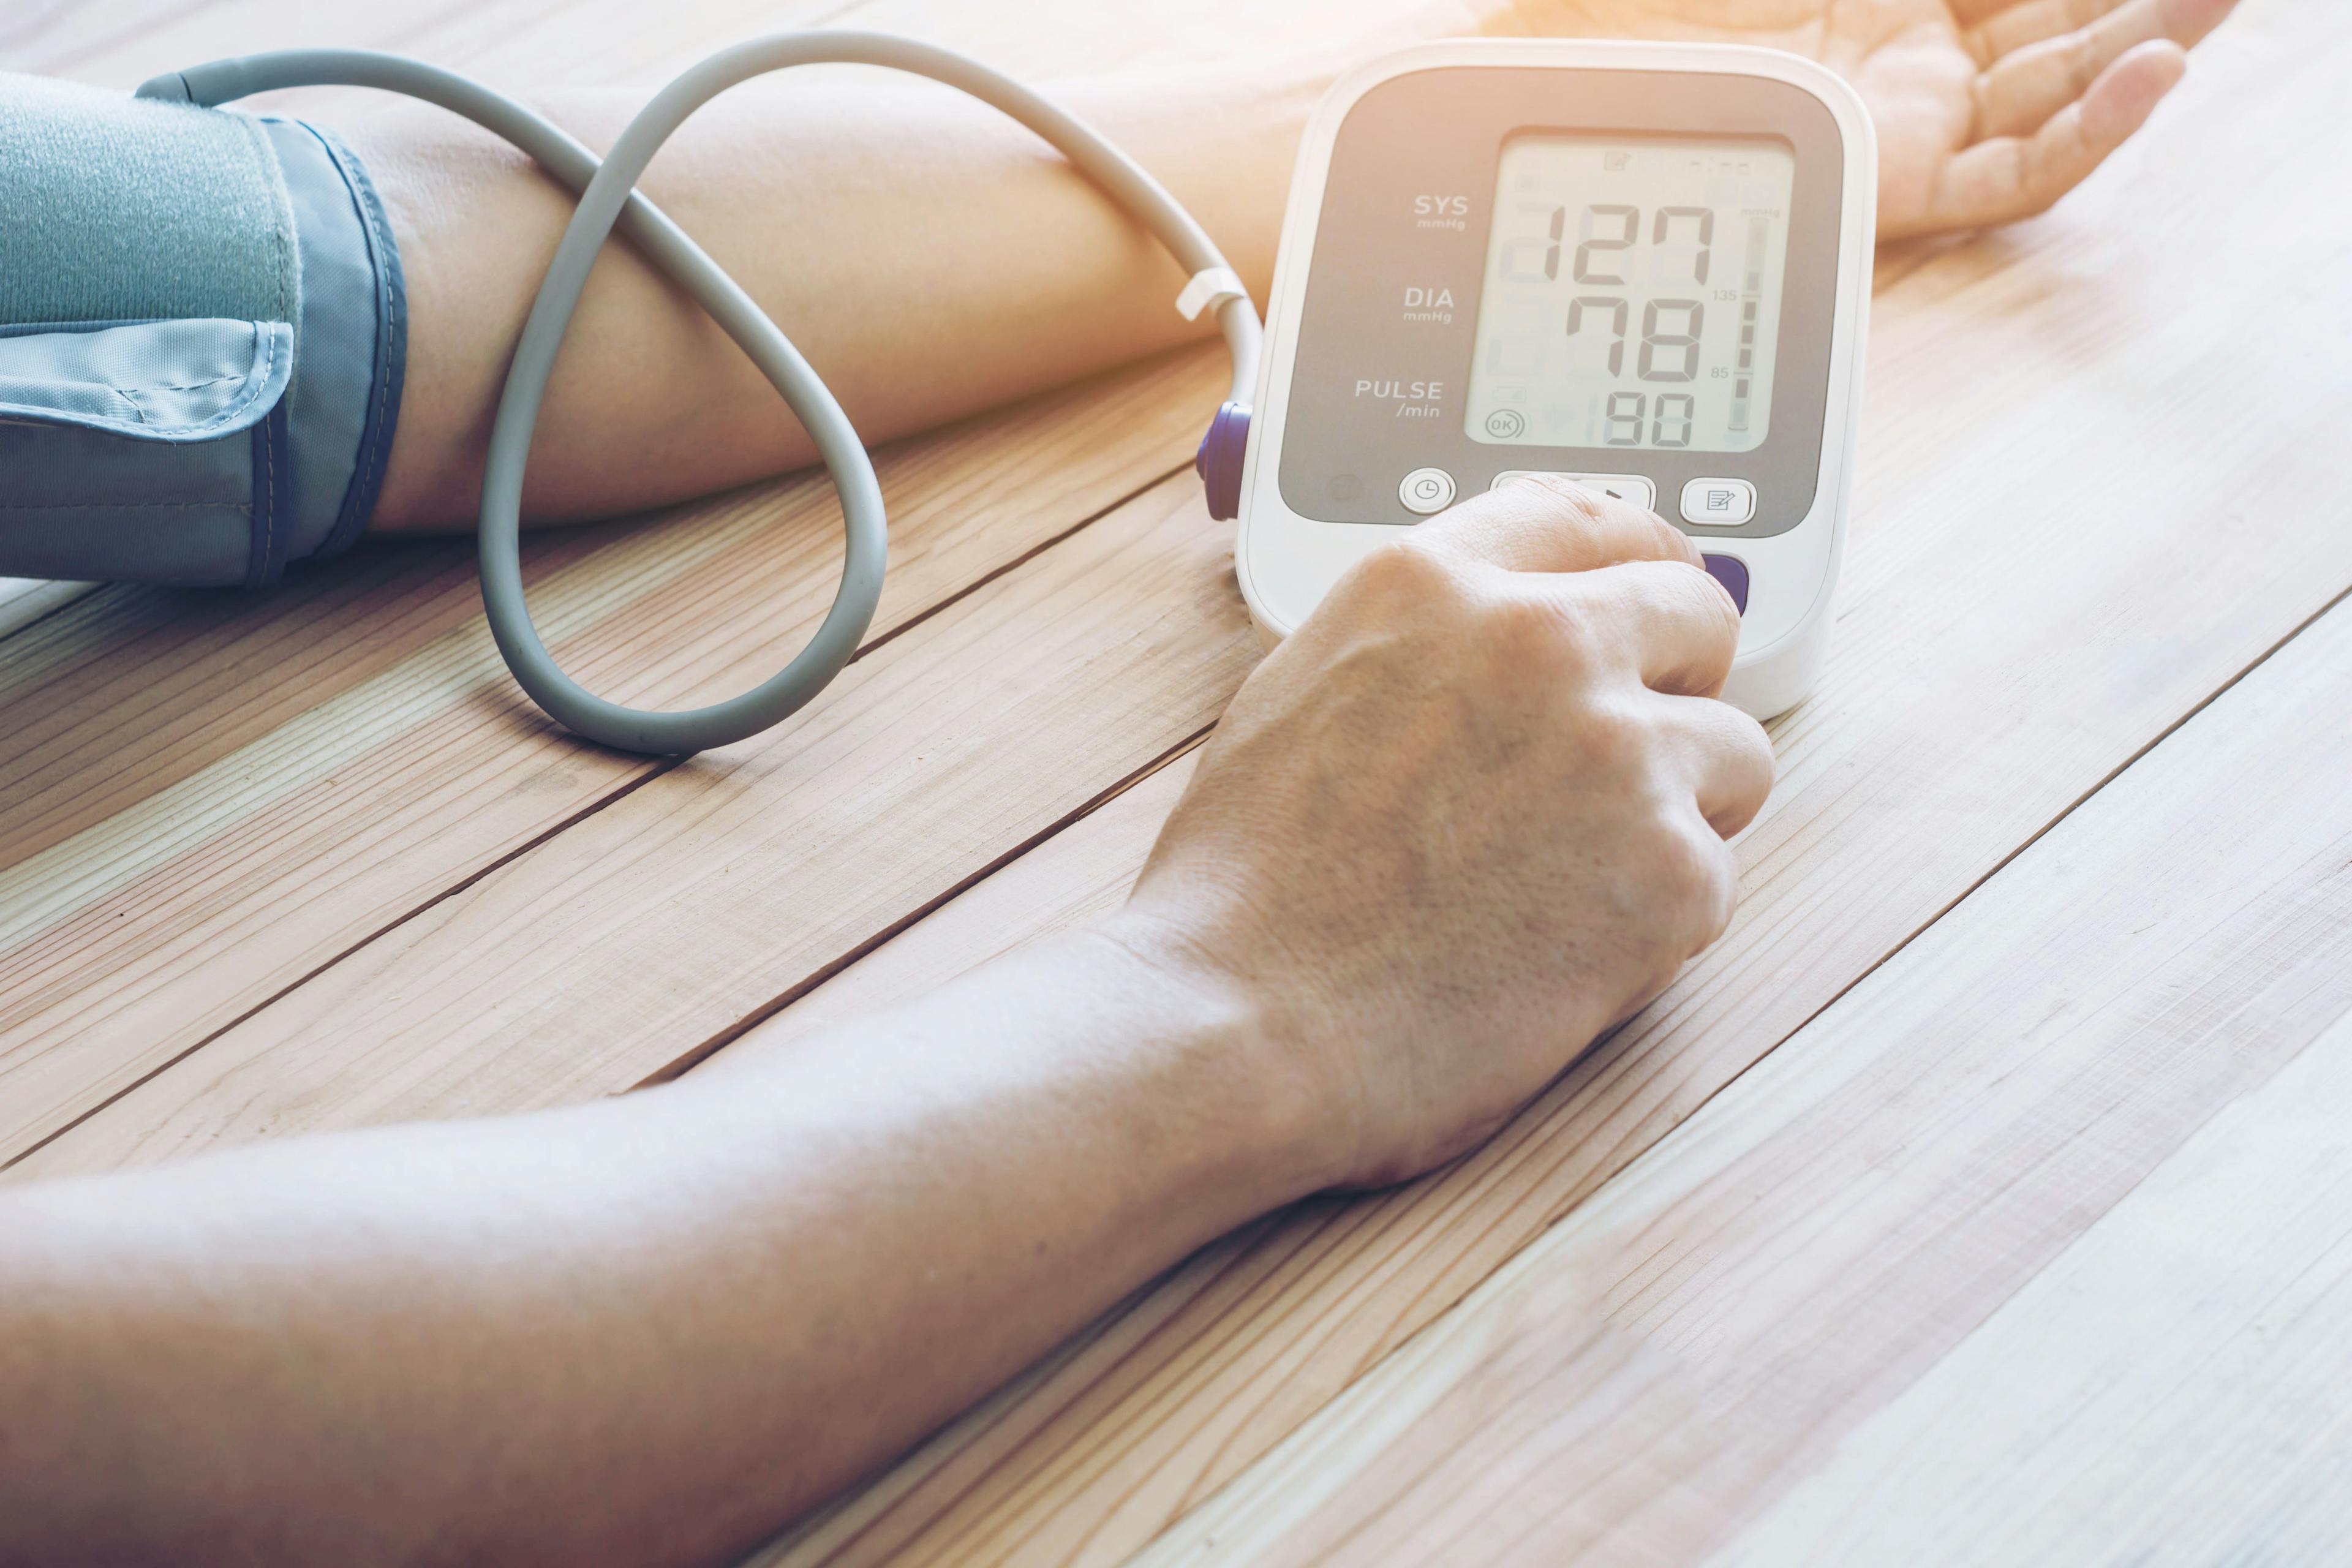 man is taking care for health with hearth beat monitor and blood pressure | Image Credit: lesterman - stock.adobe.com